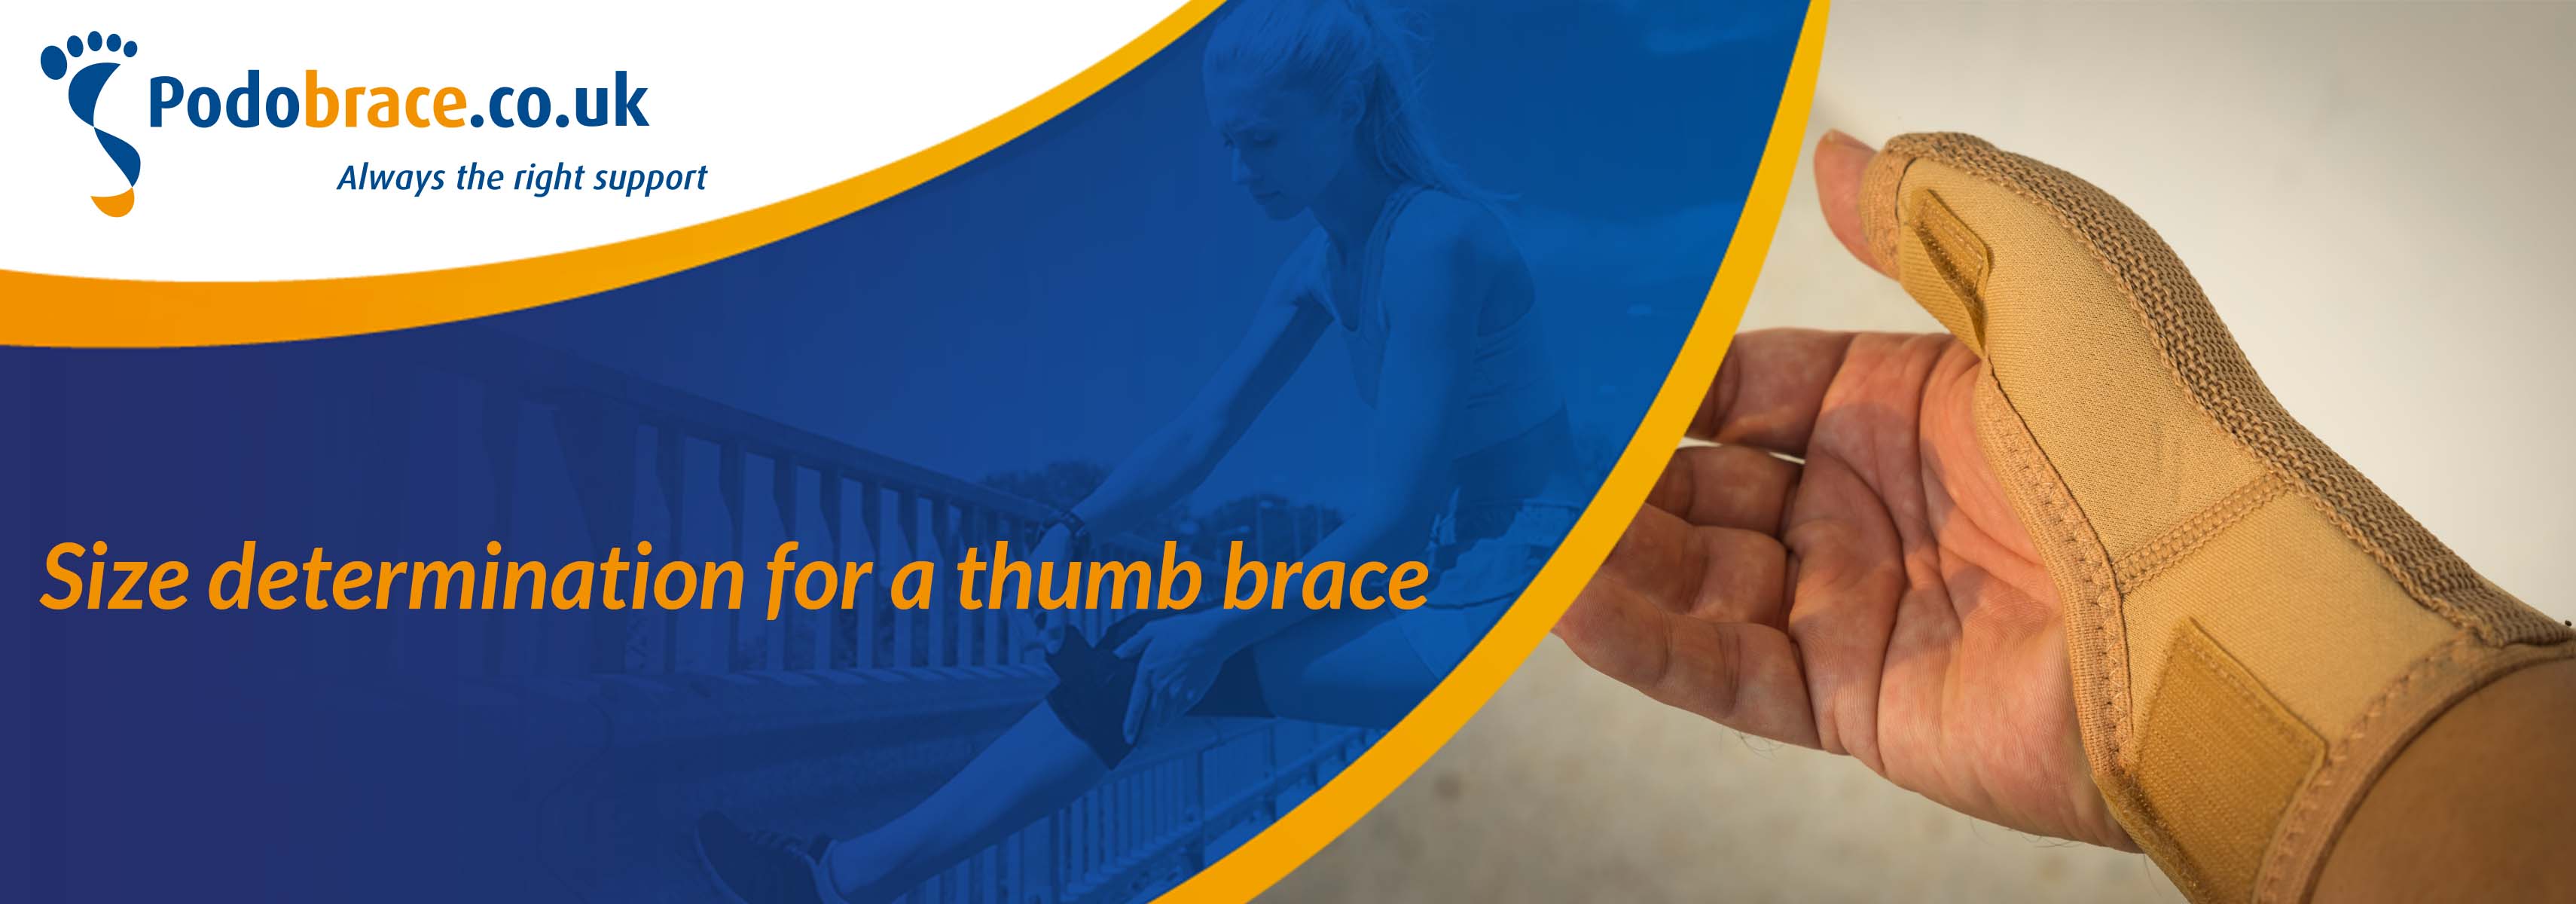 size determination for a thumb brace